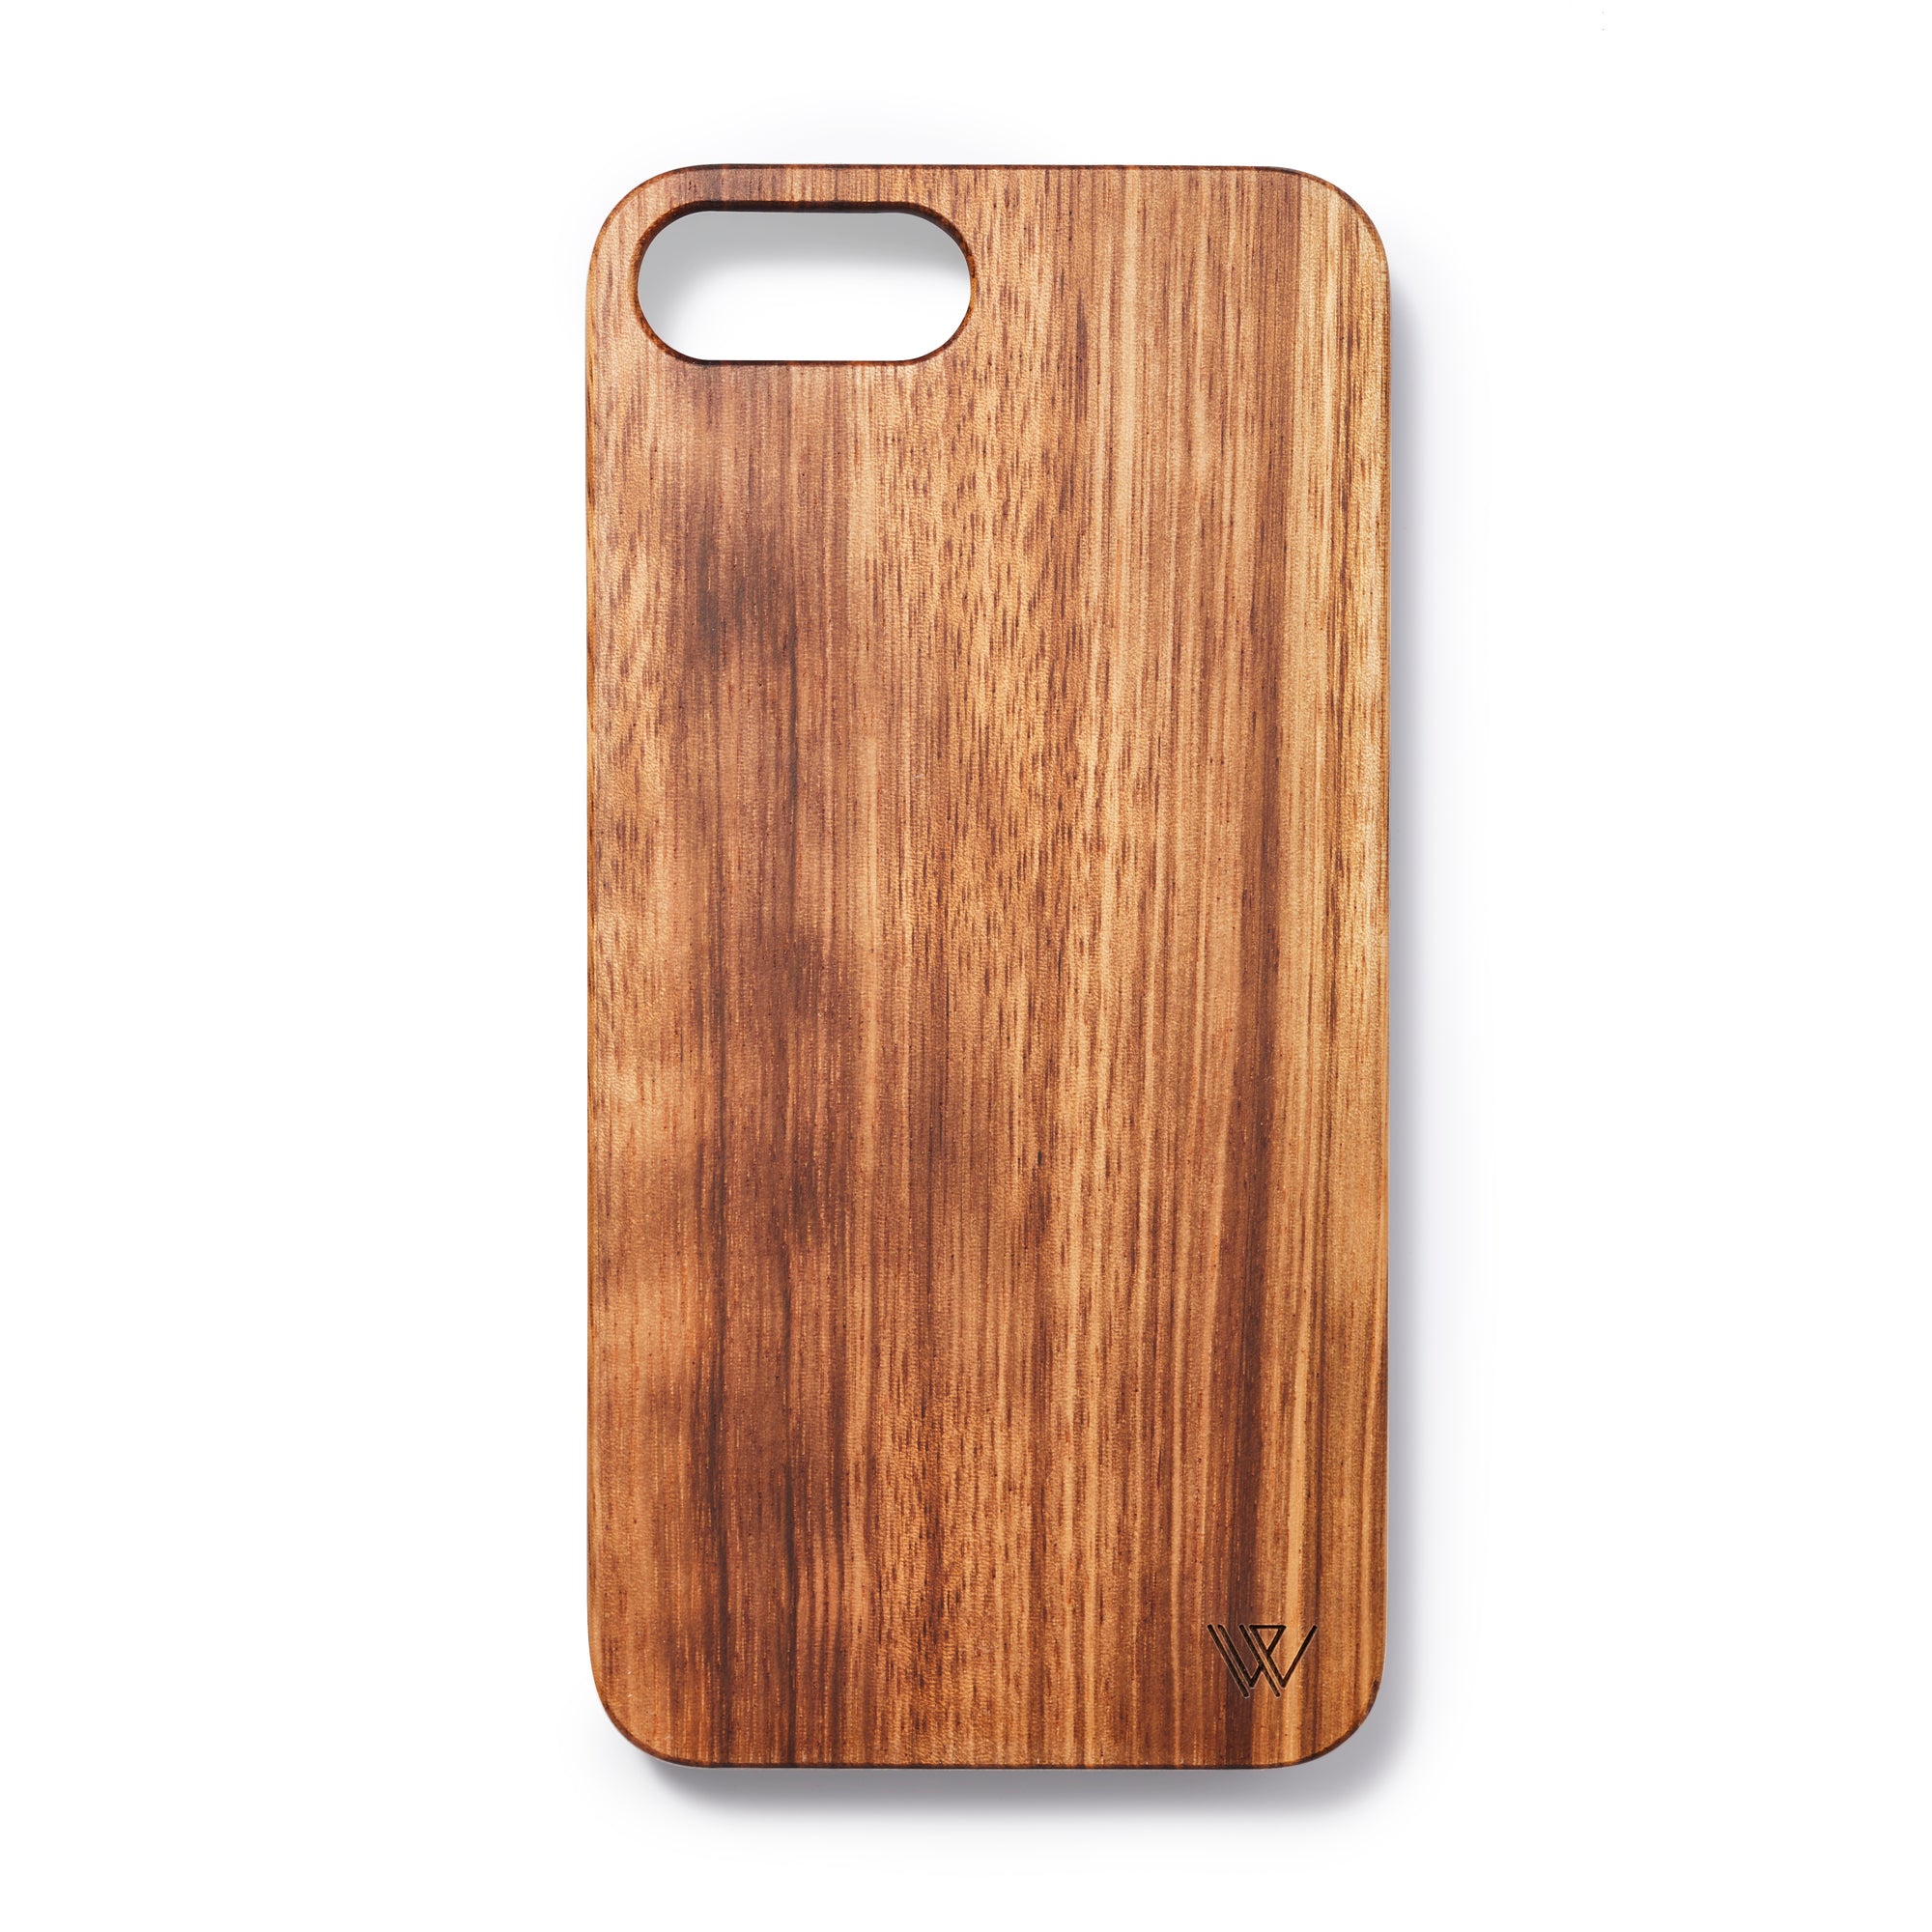 Wooden Iphone 6,7 and 8 plus back case zebrano - Woodstylz